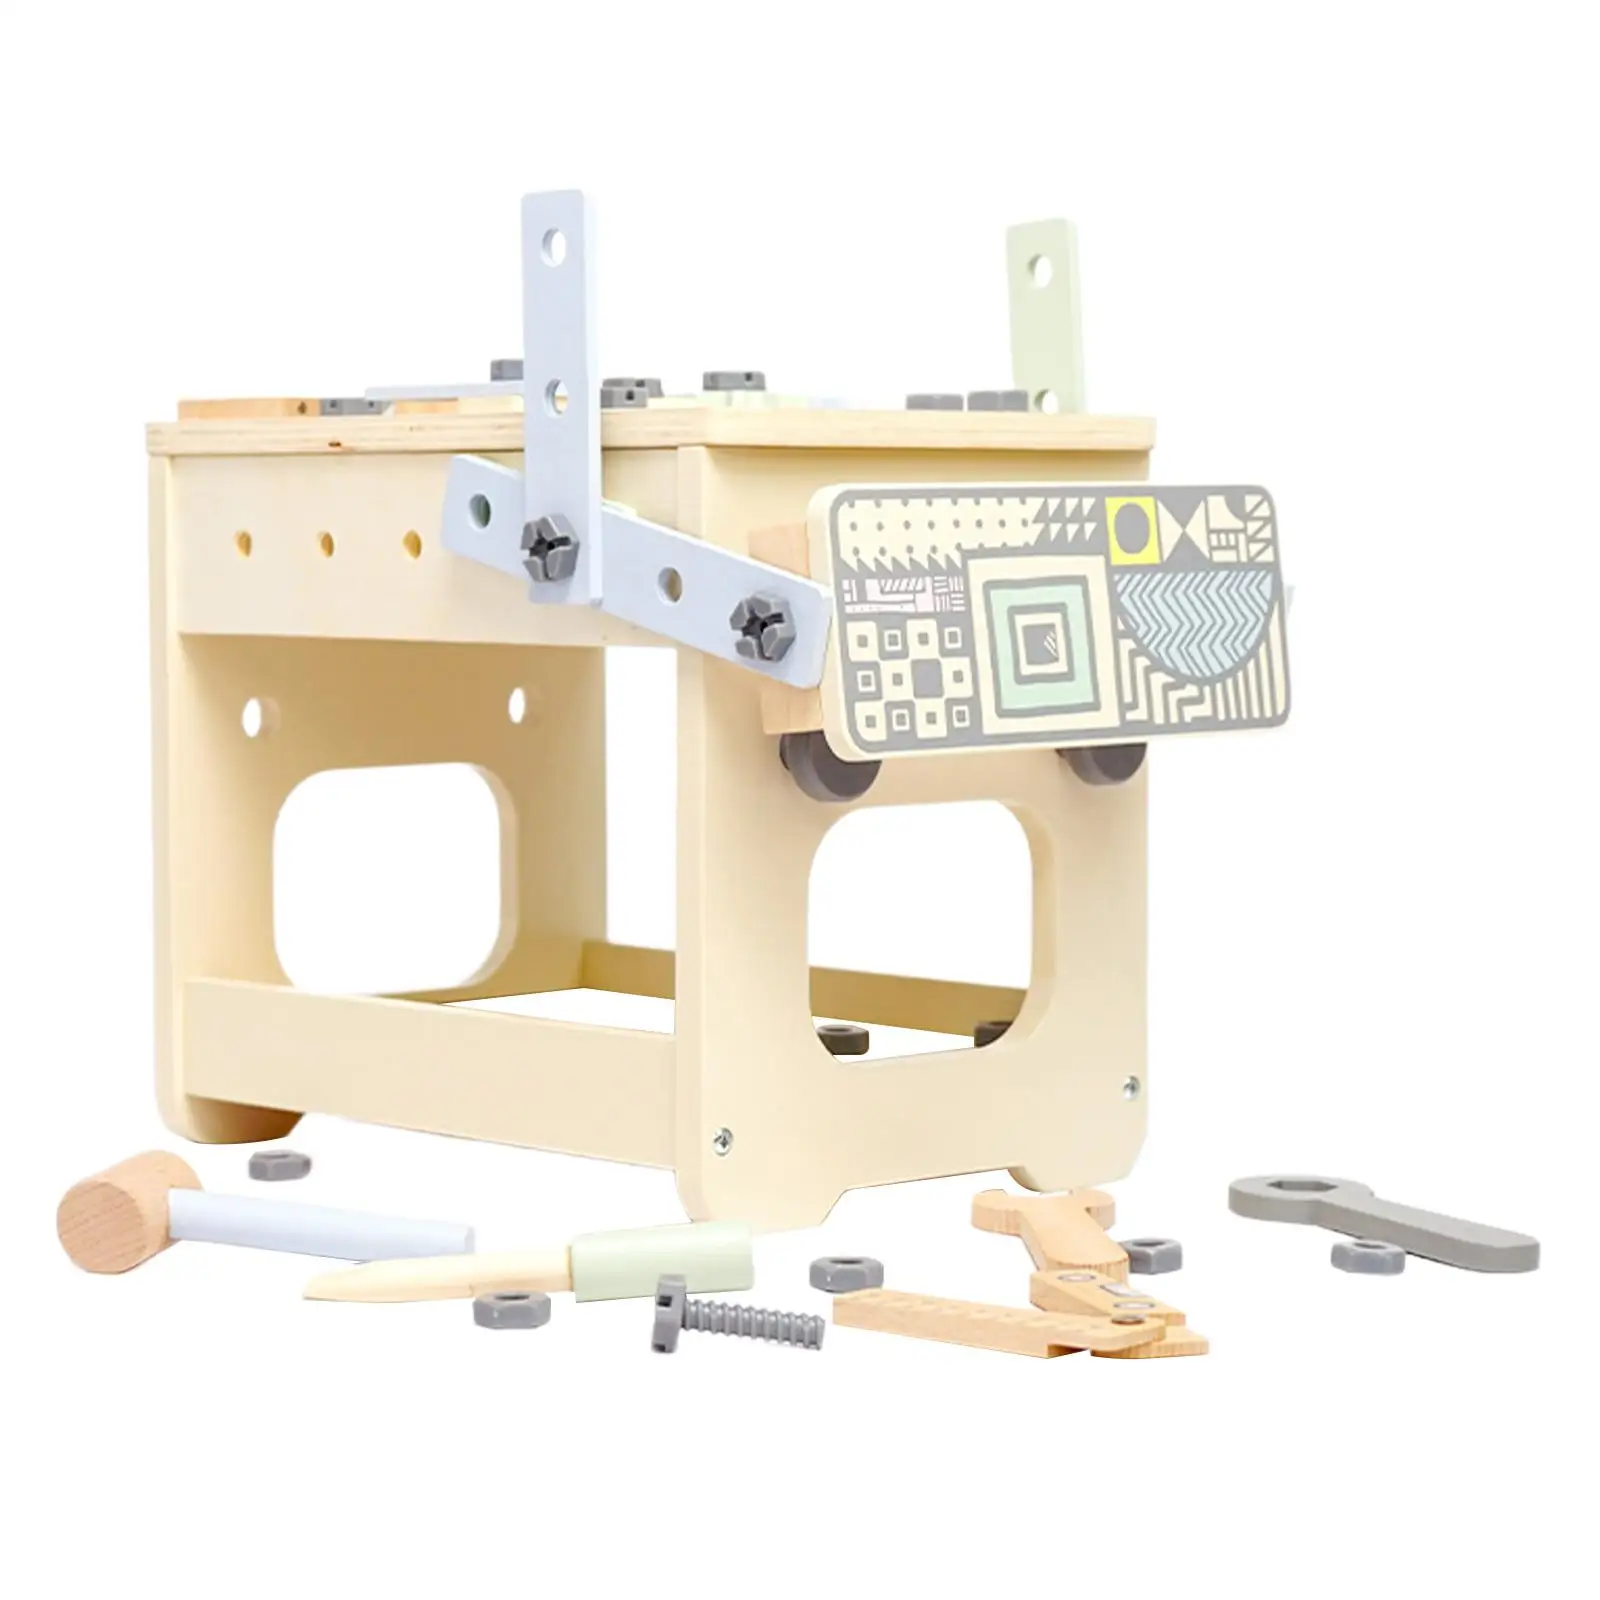 Tool Bench Set Construction Building Toy for Preschool Education Learning